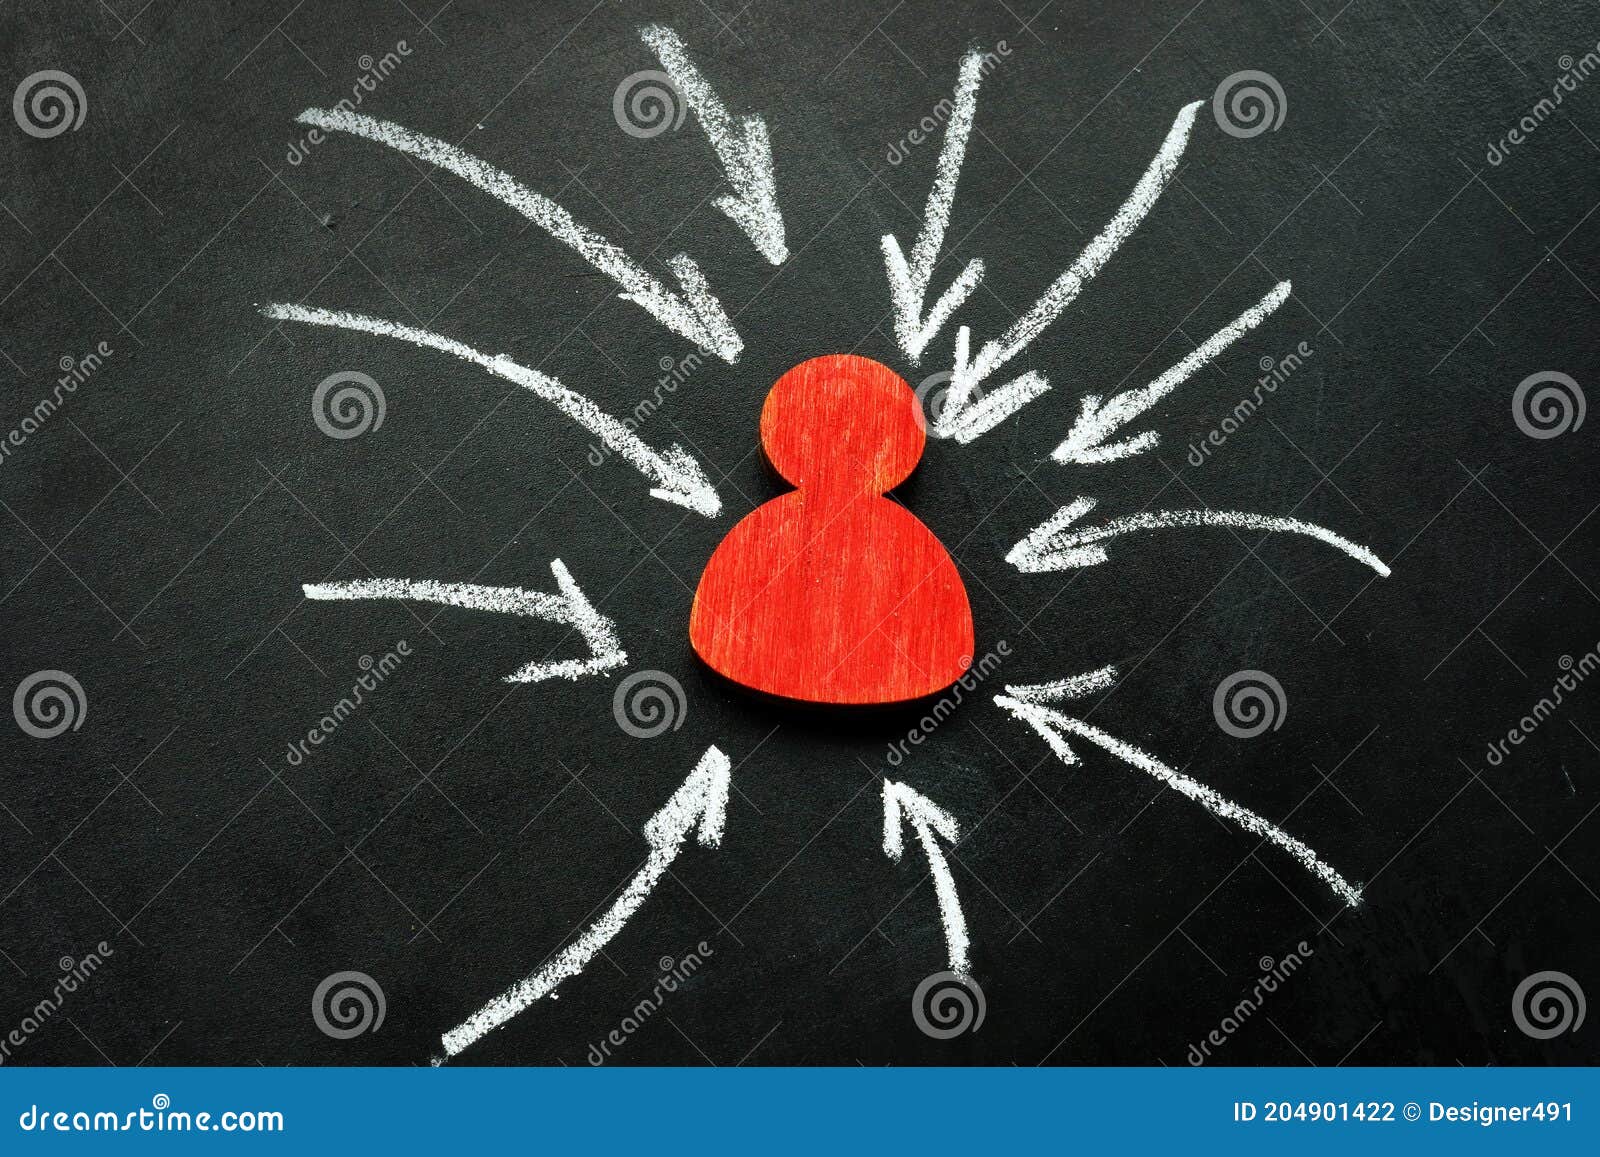 resilience and assertiveness concept. red figurine and arrows.